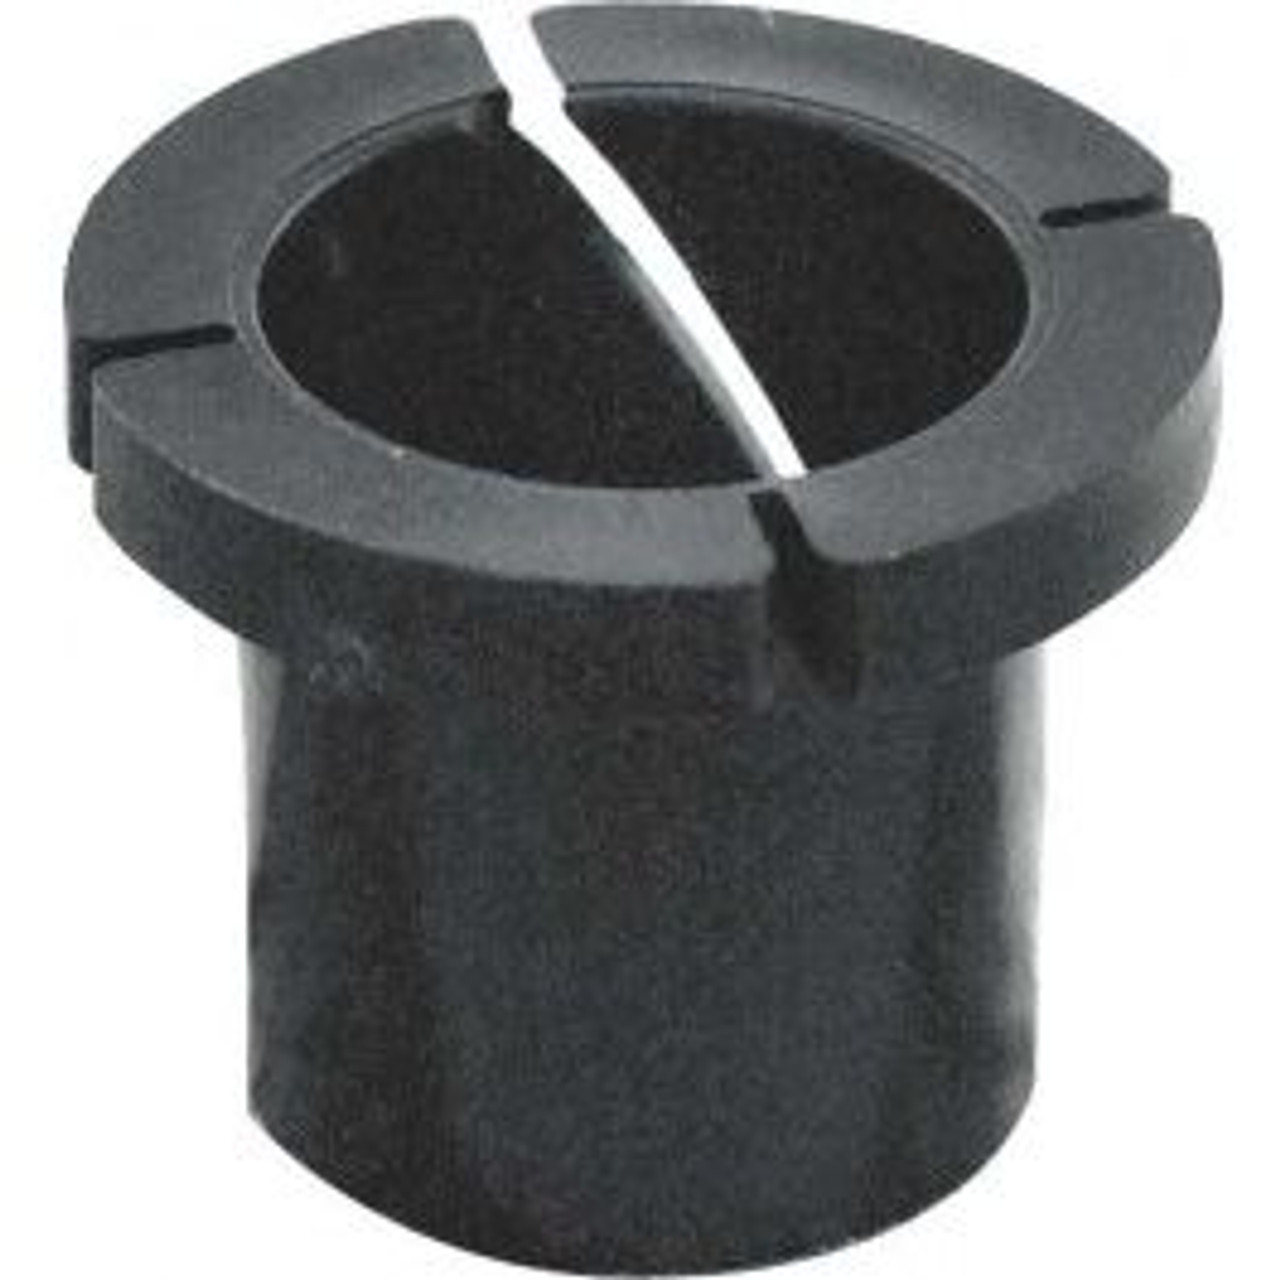 1967-77 Ford Truck Brake and Clutch Pedal Bushing, ea. (also 1966-79 Bronco, 1965-73 Mustang, 1960-72 Galaxie)